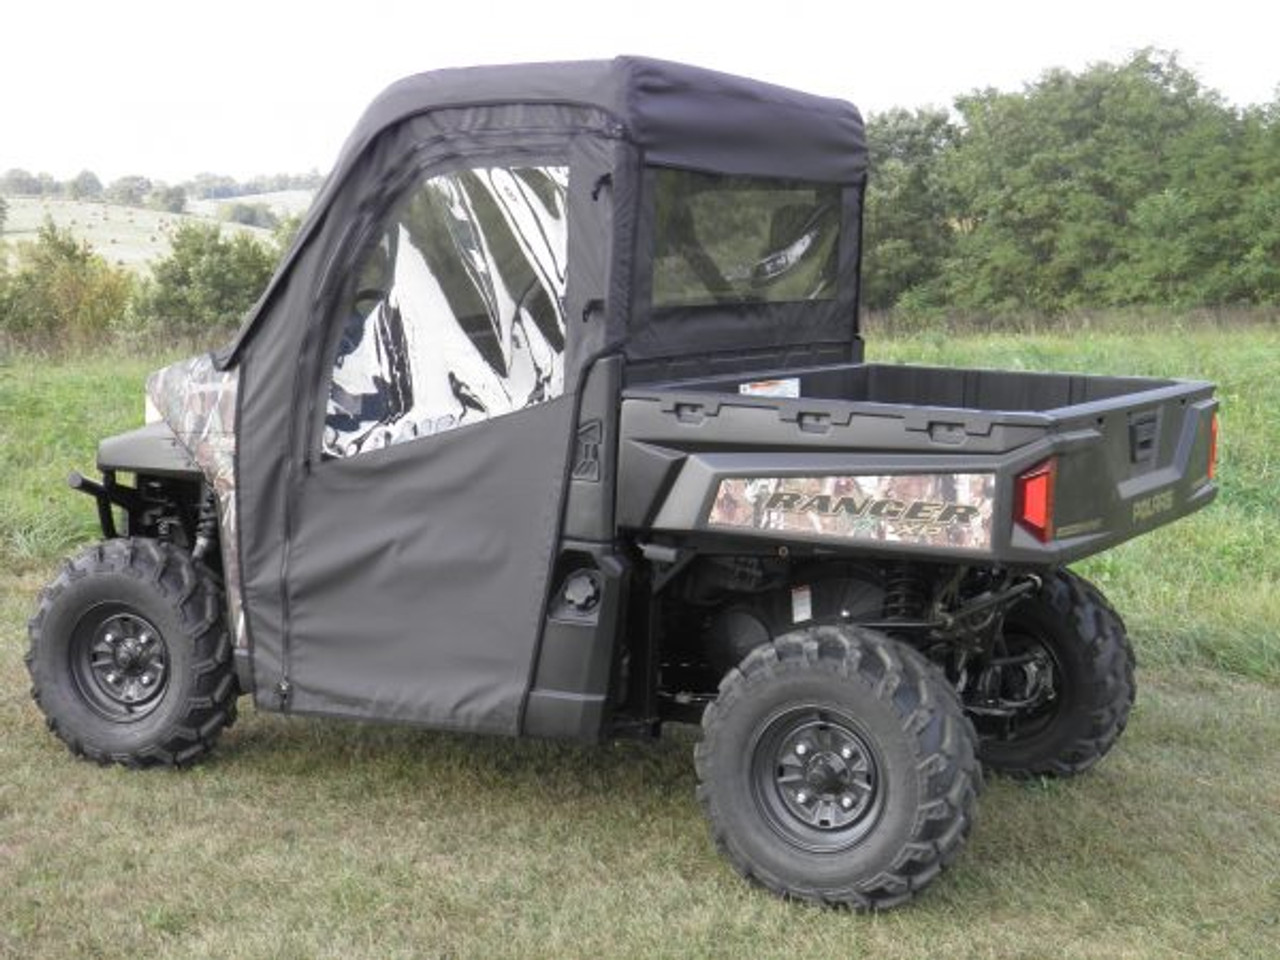 3 Star side x side Polaris Ranger XP900 570 XP570 XP1000 1000 soft full cab enclosure with vinyl windshield rear and side angle view